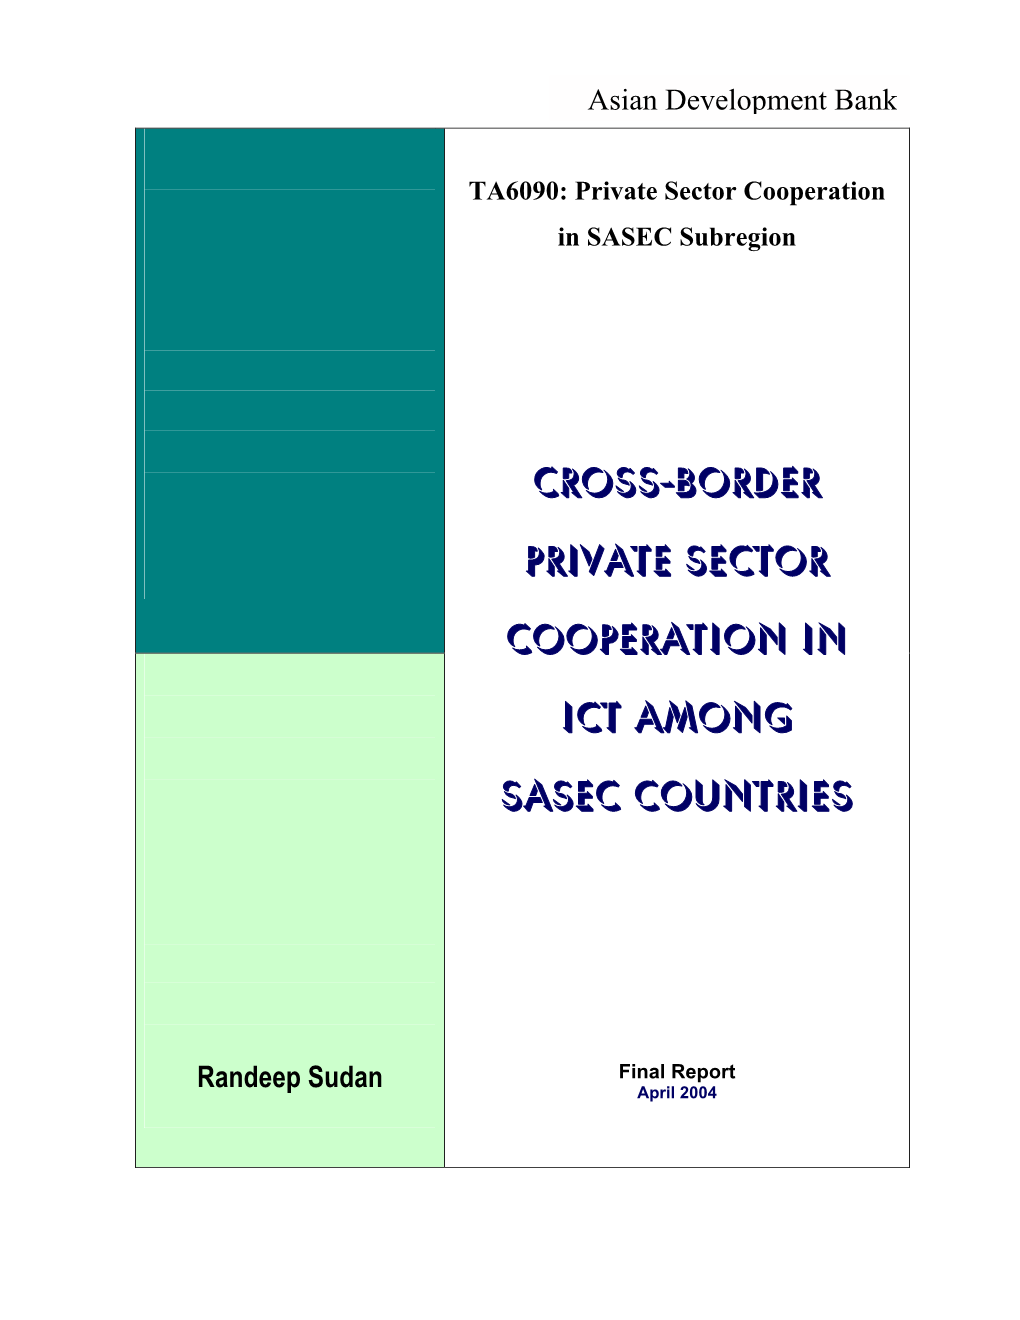 Cross-Border Private Sector Cooperation in ICT Among SASEC